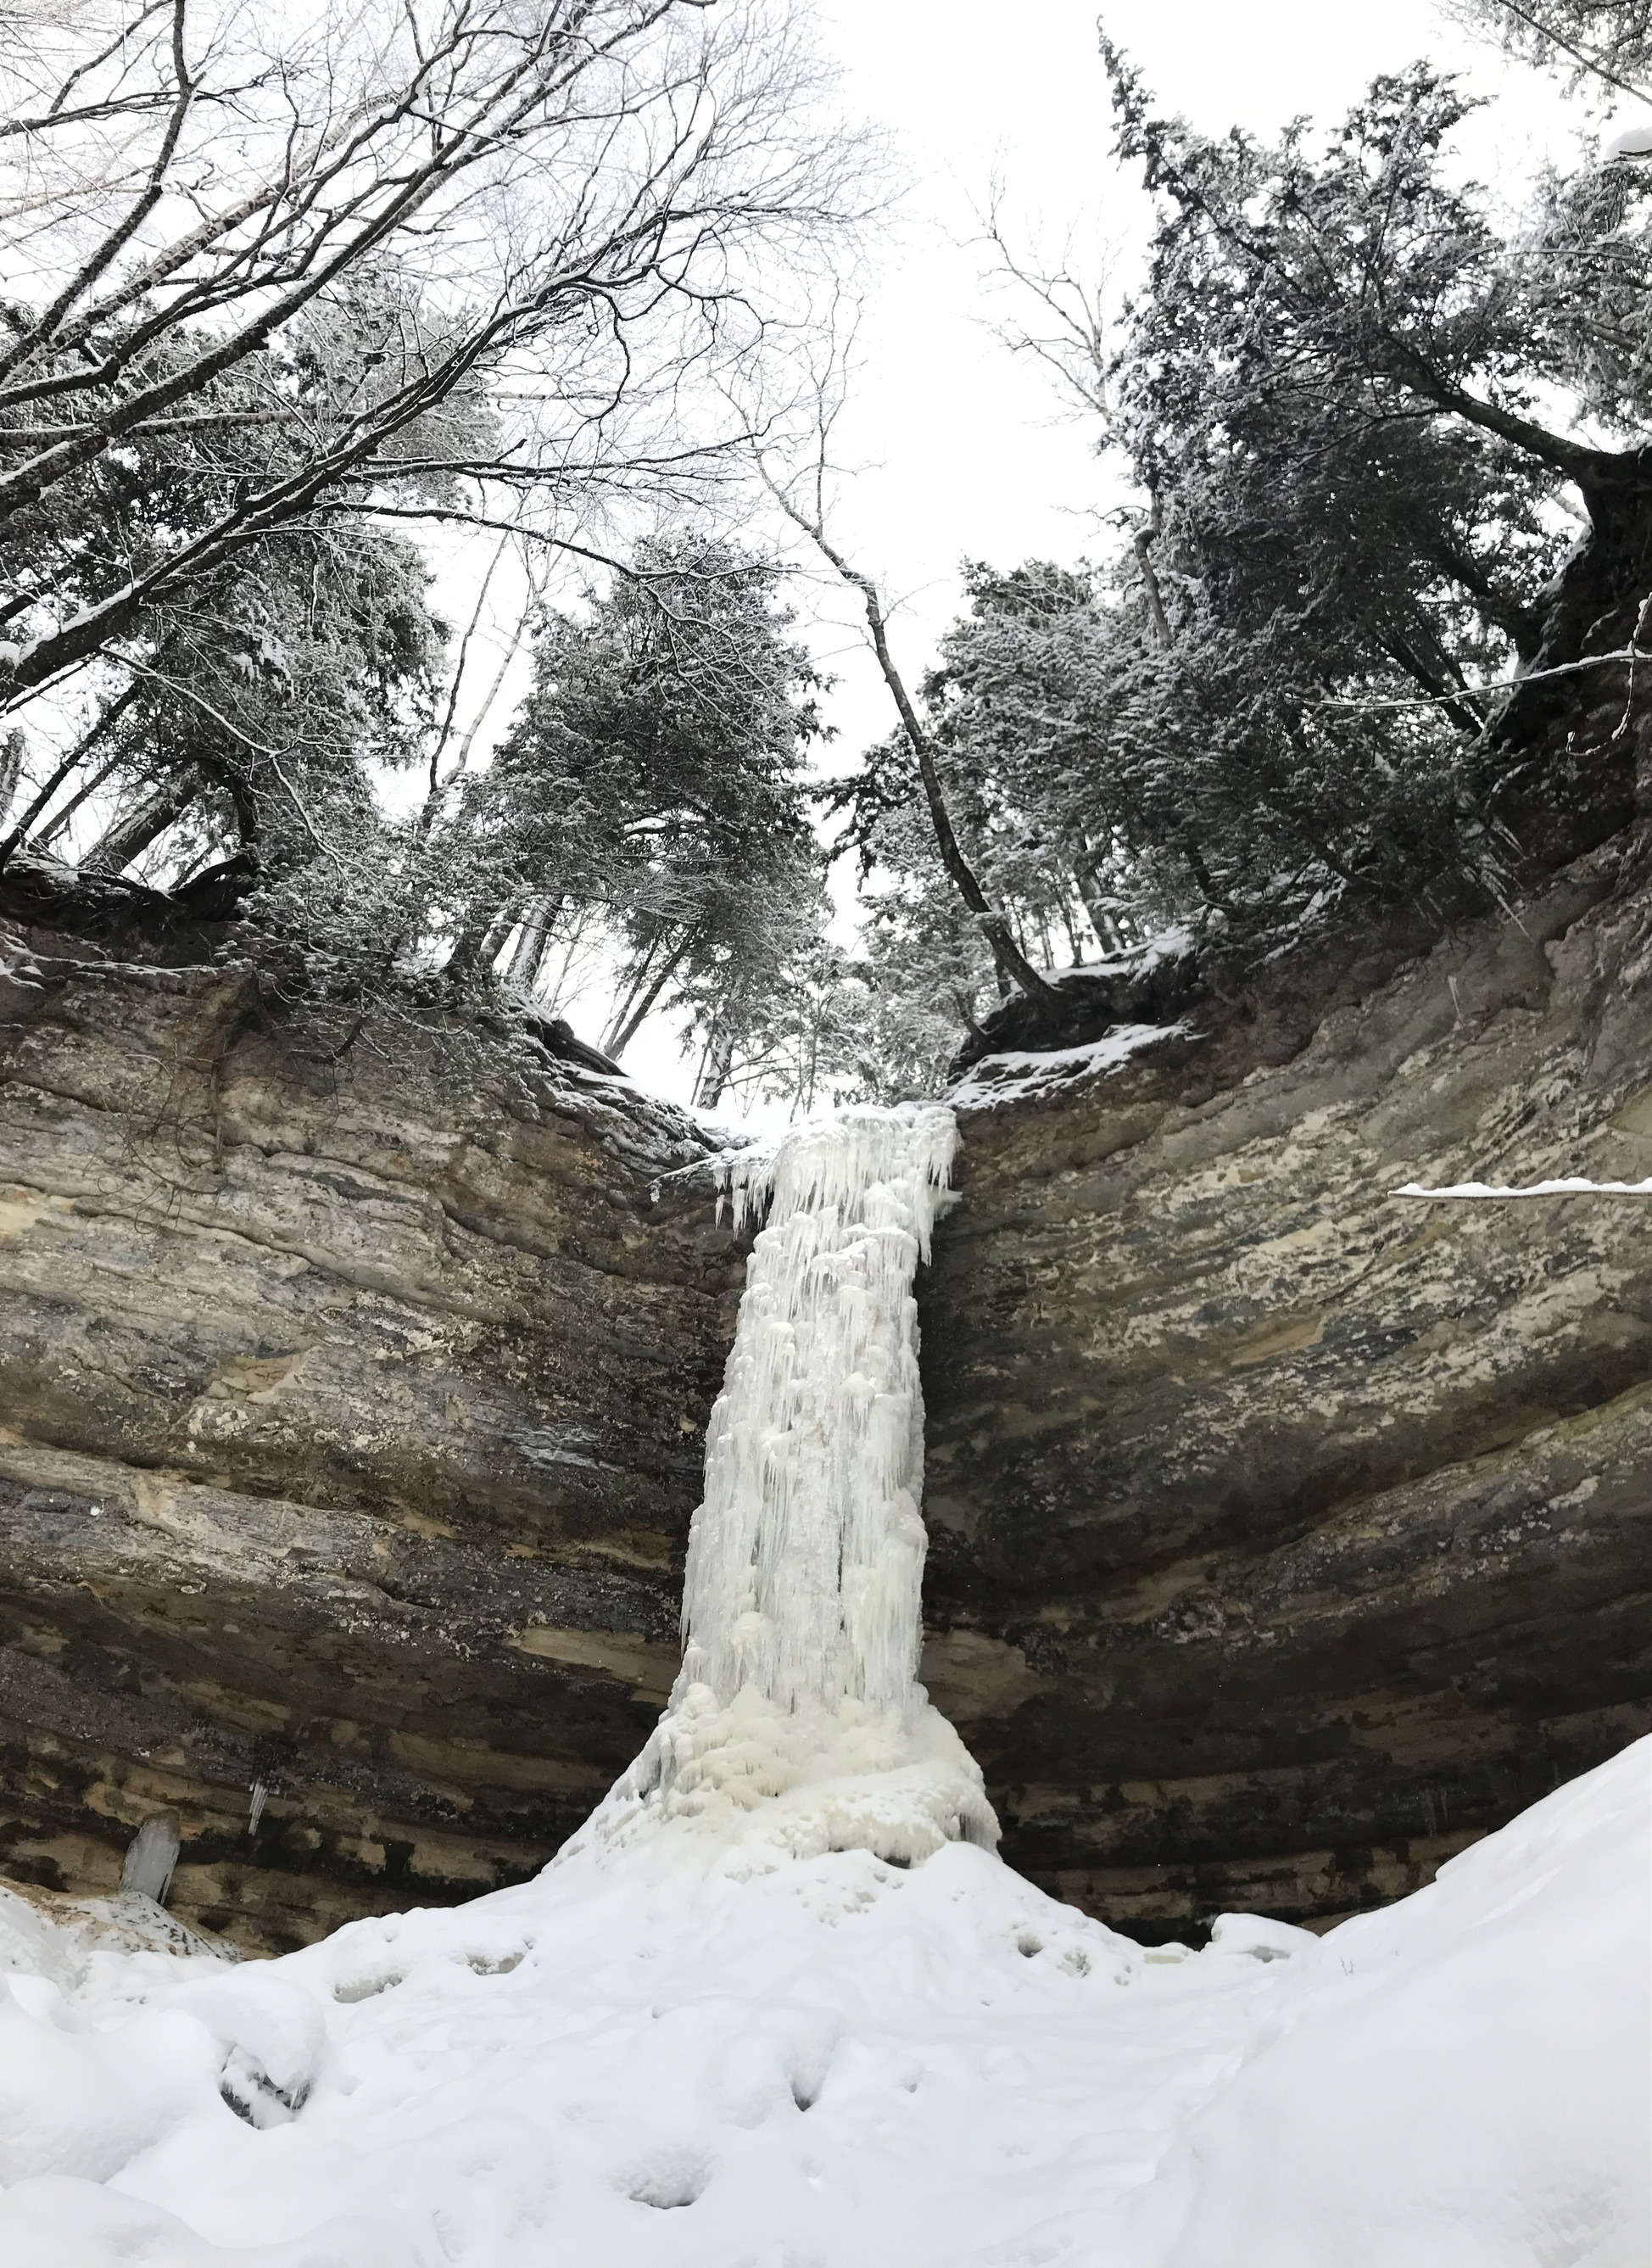 The frozen water flow is over 50 high and is roundish in shape - like a dryer hose. It's lined on either side with layered sandstone cliffs.